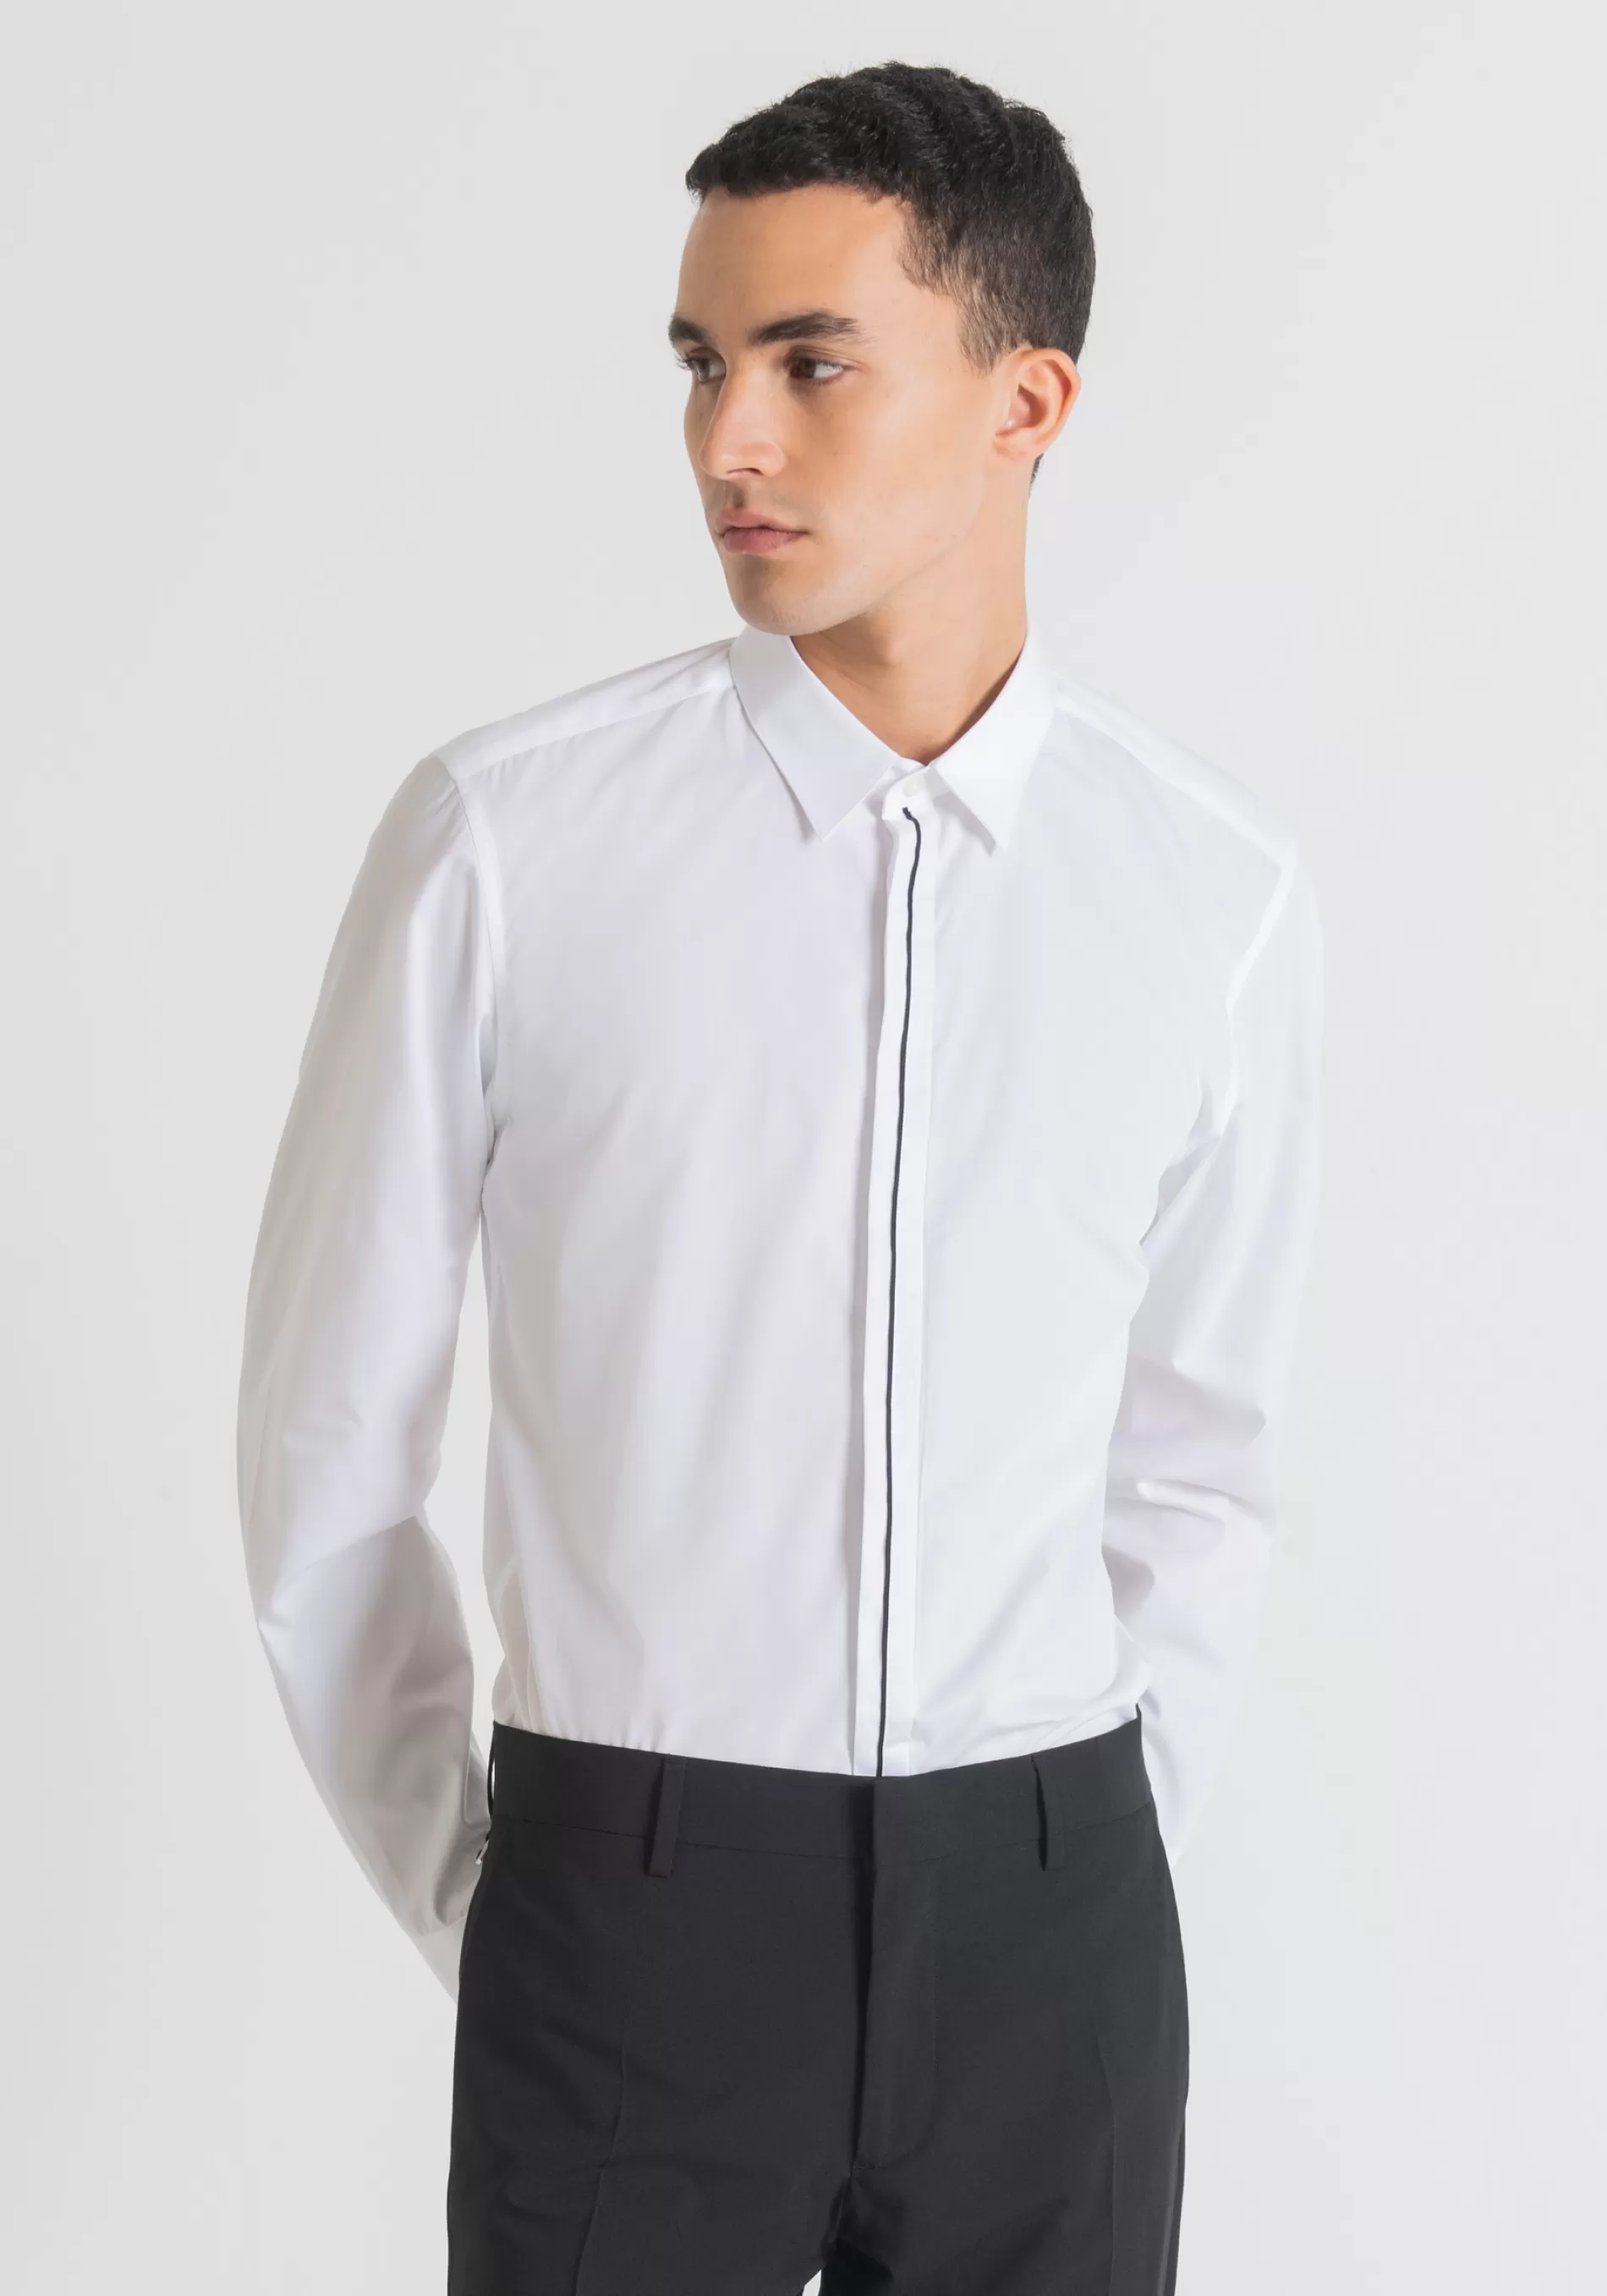 Sale “PARIS” EASY-IRON SLIM FIT SHIRT IN PURE SOFT-TOUCH COTTON WITH CONCEALED BUTTONS Shirts